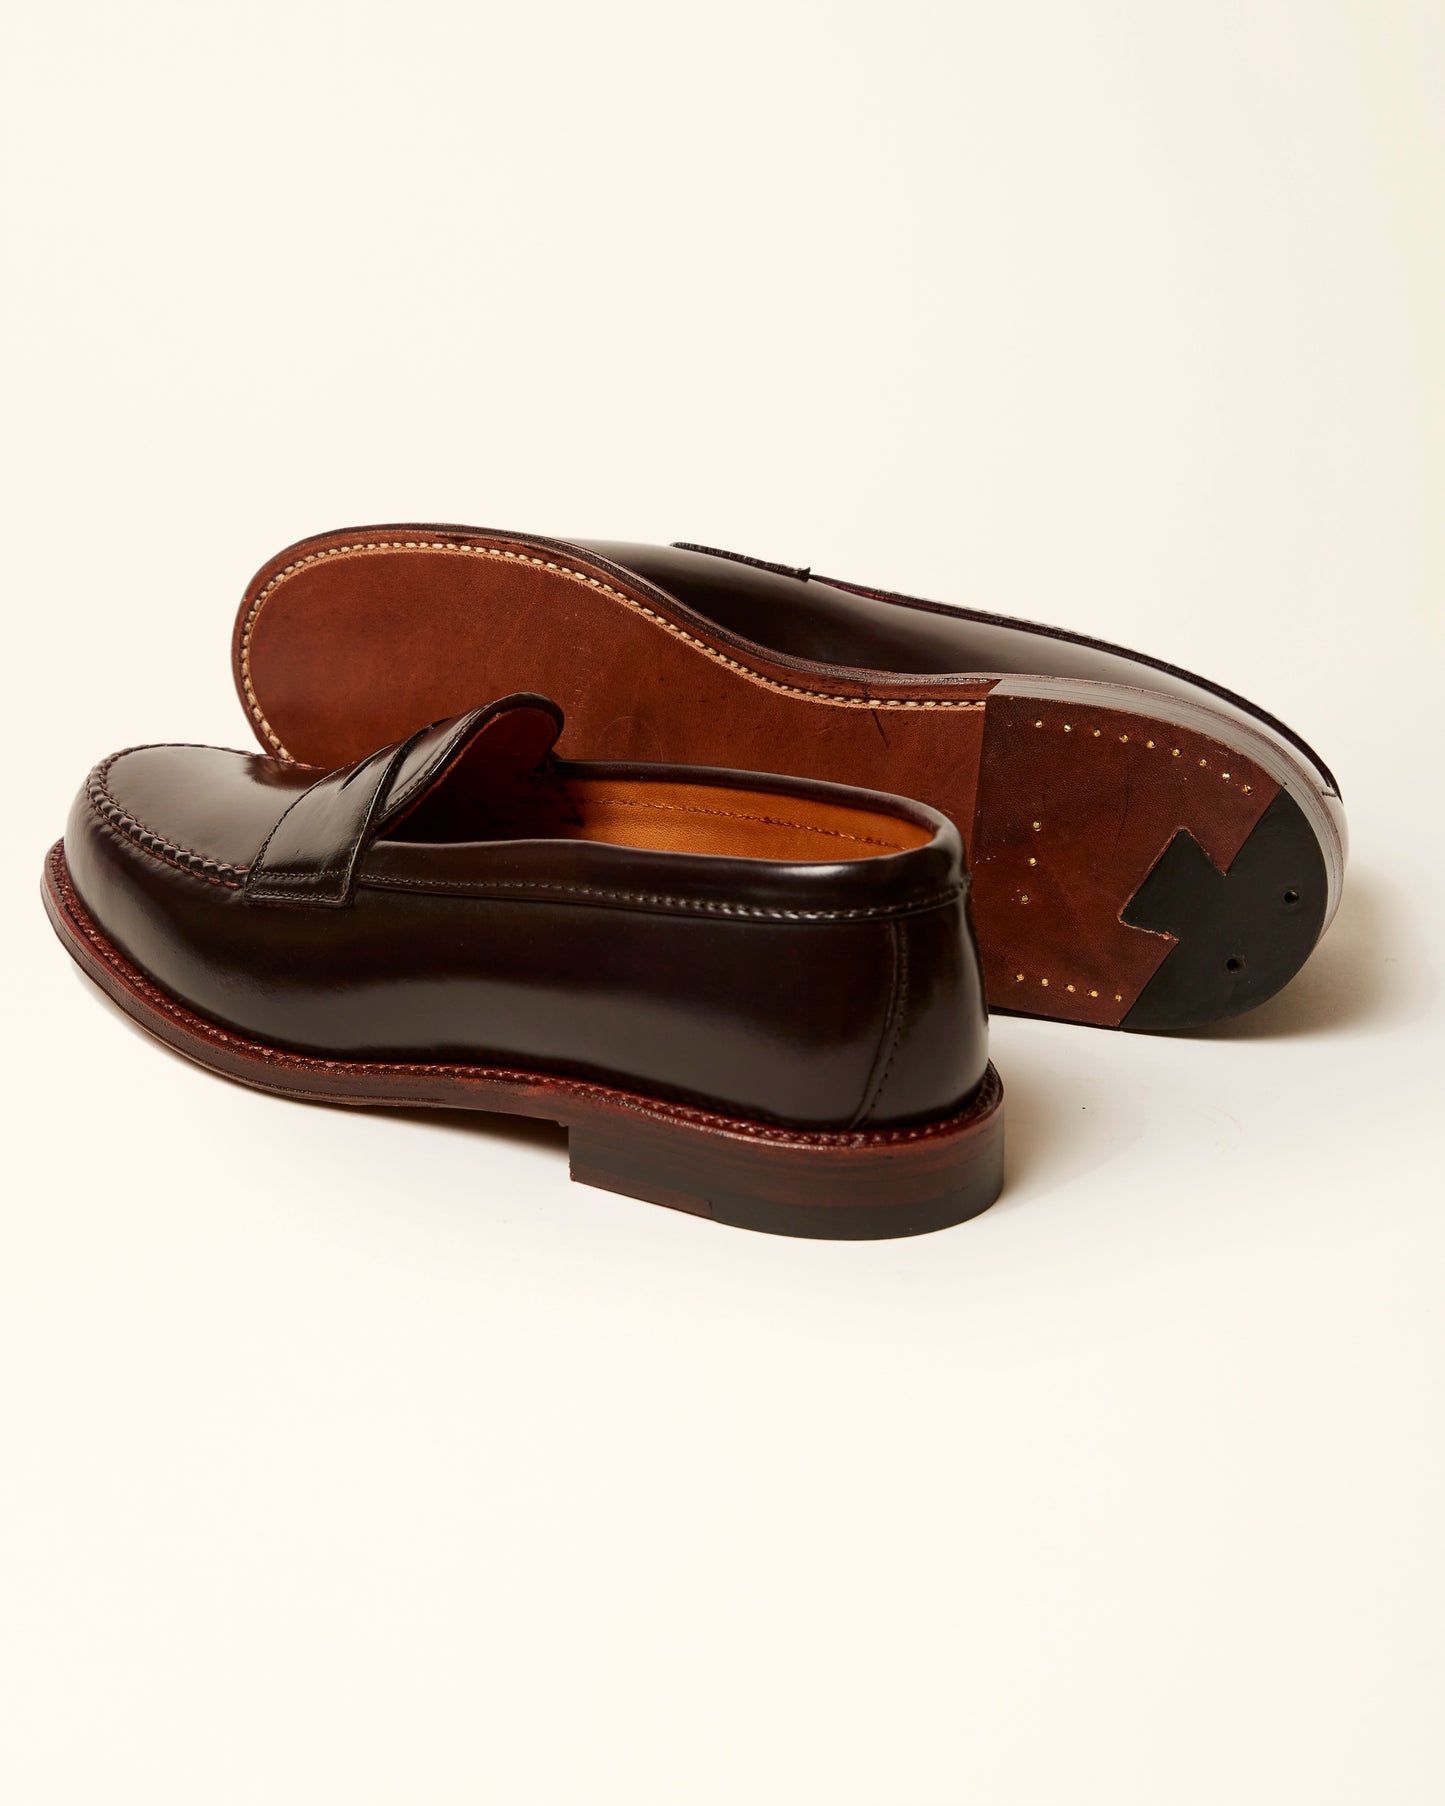 "University Loafer" 986A Color 8 Shell Cordovan LHS (Antique Welt)